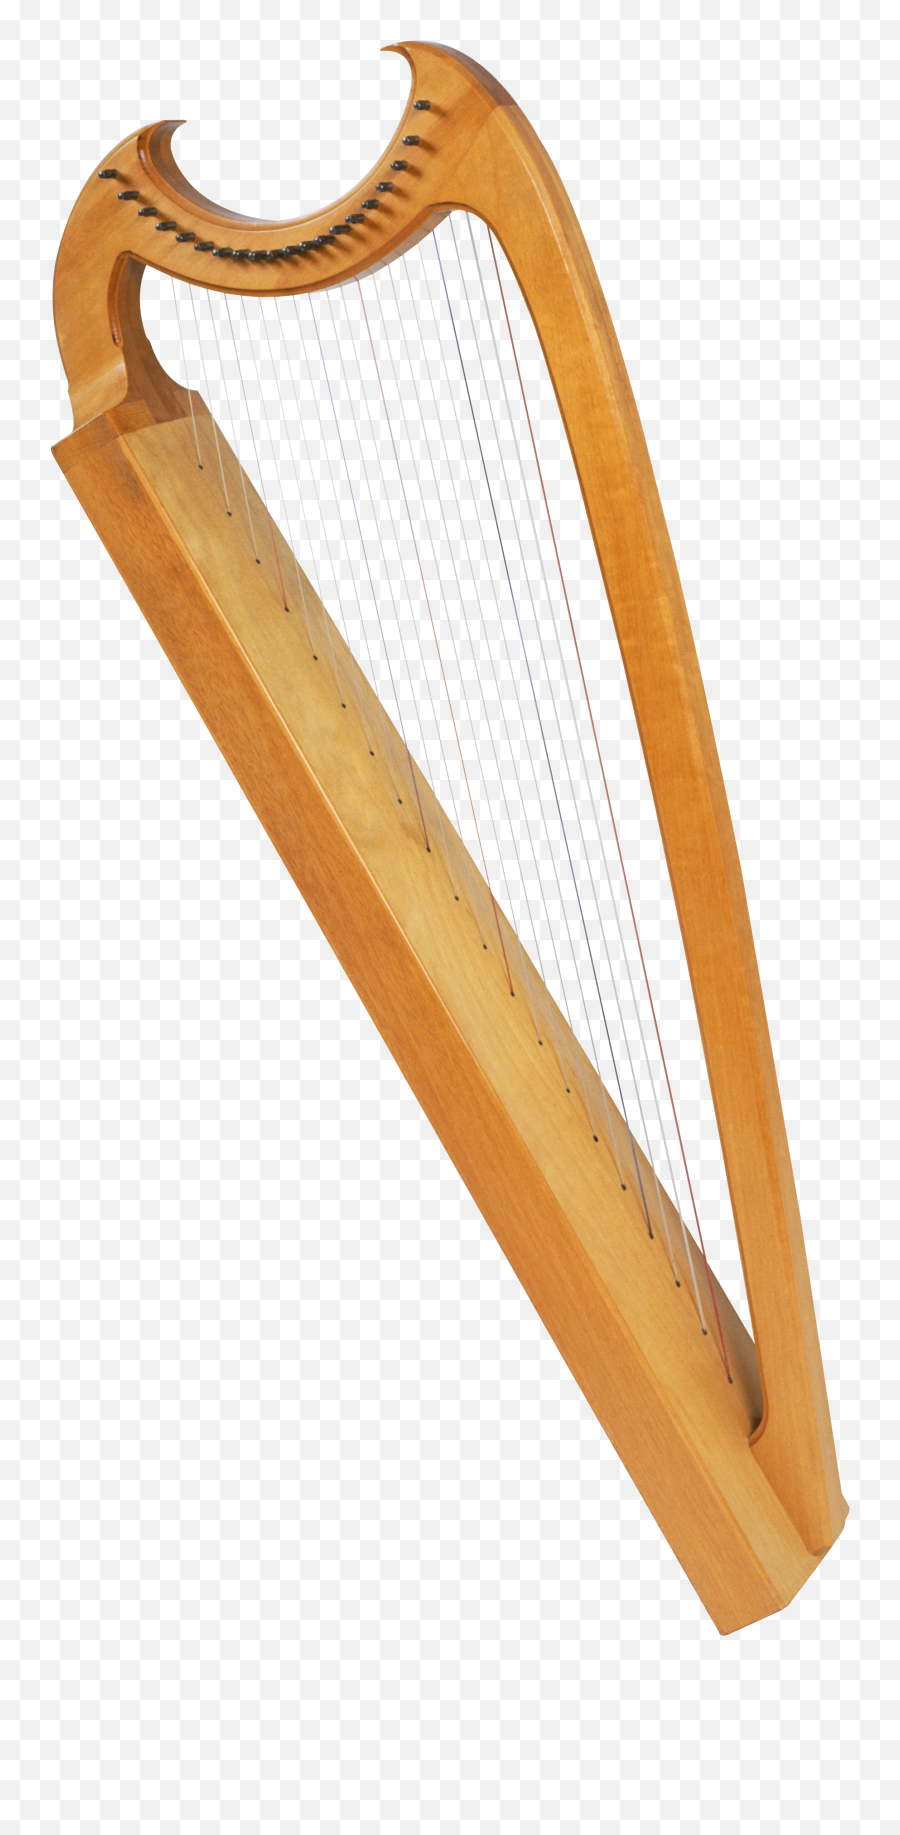 Download Harp Png Image For Free